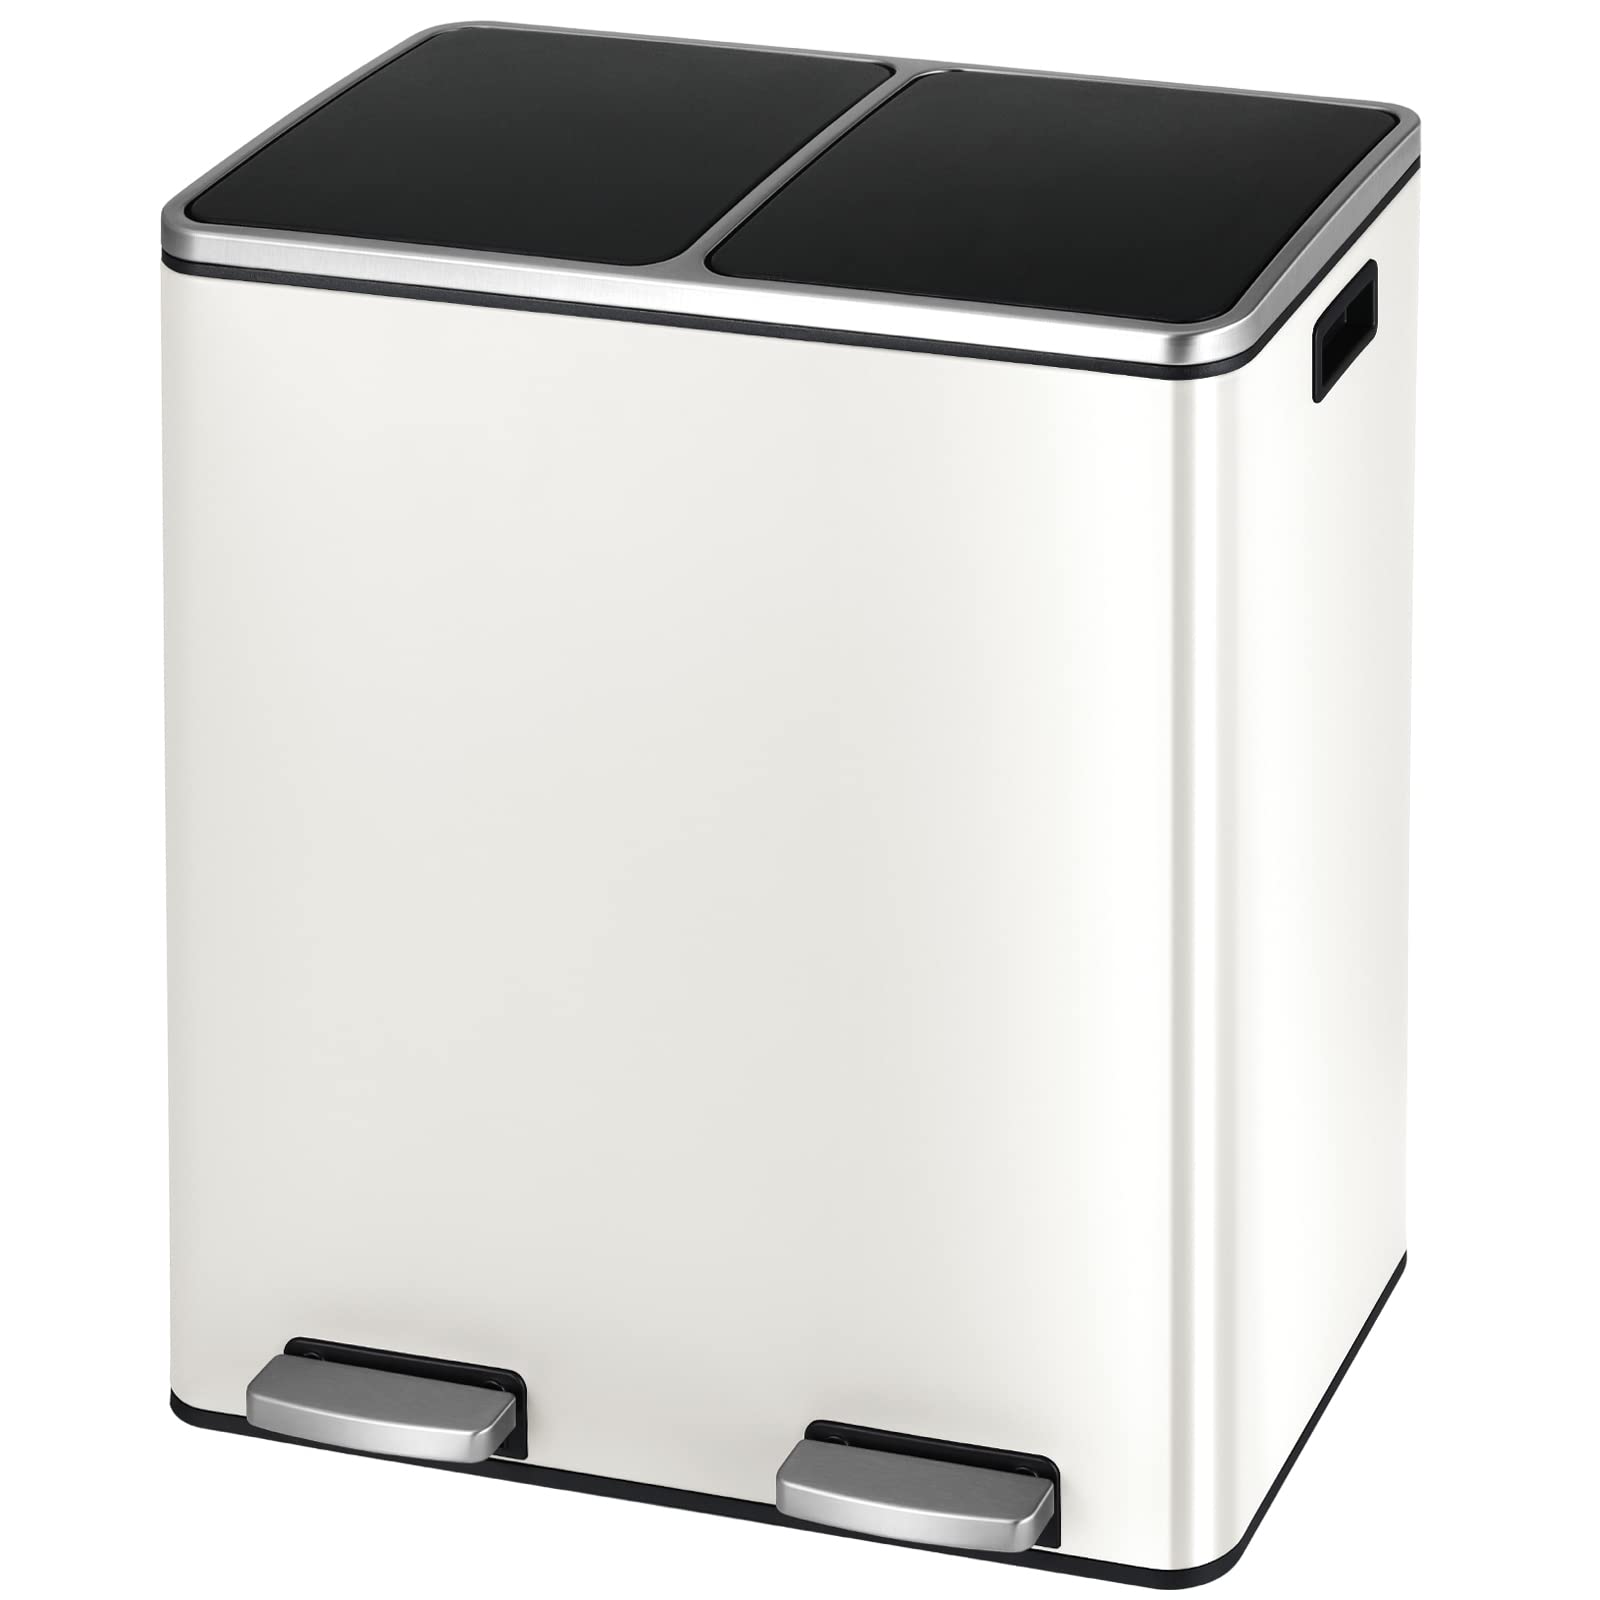 Arlopu 16 Gallon Stainless Steel Trash Can, 60L Dual Compartment, Metal Kitchen Step Recycle Bin, Metal Double Dustbin, in-Home Garbage Rubbish Can W/Removable Liner Buckets,